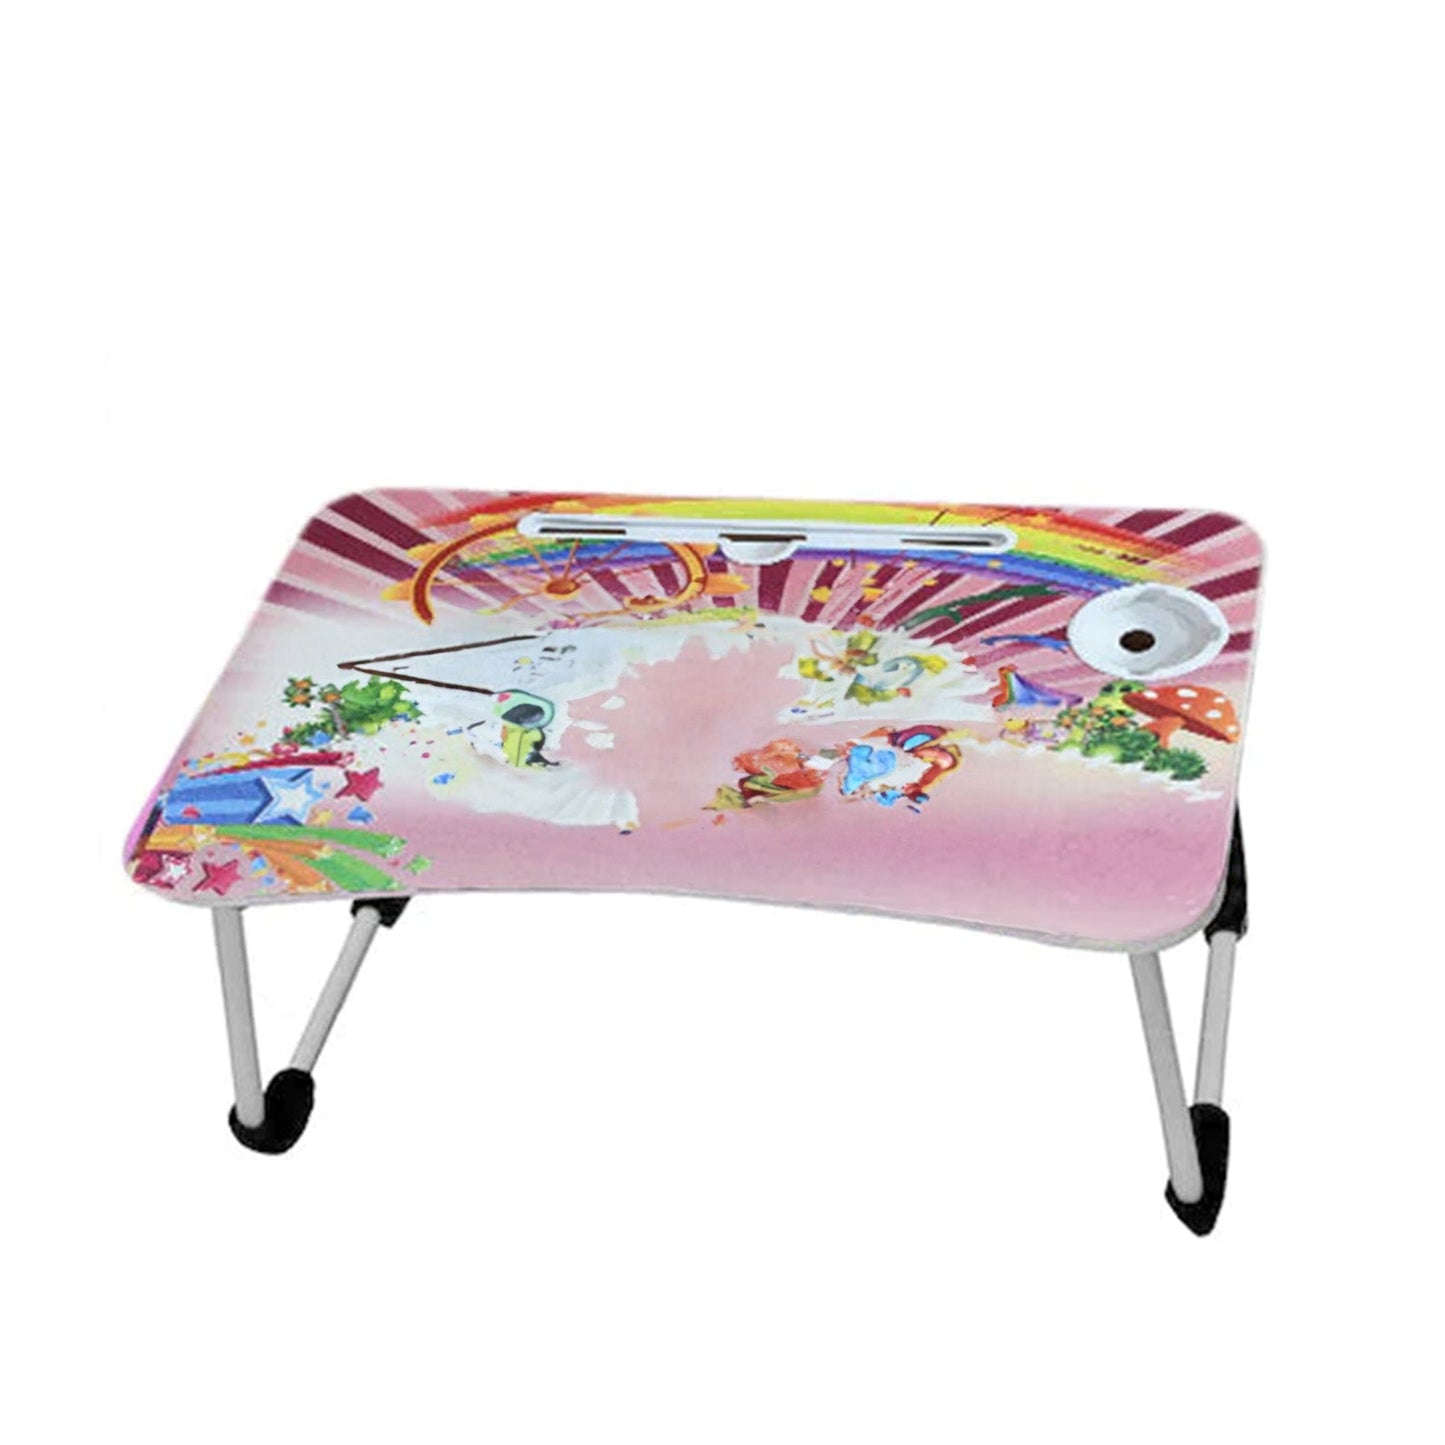 Foldable Bed Study Table Portable Multifunction Laptop Table Lapdesk For Children Bed Foldable Table Work Office Home With Tablet Slot & Cup Holder